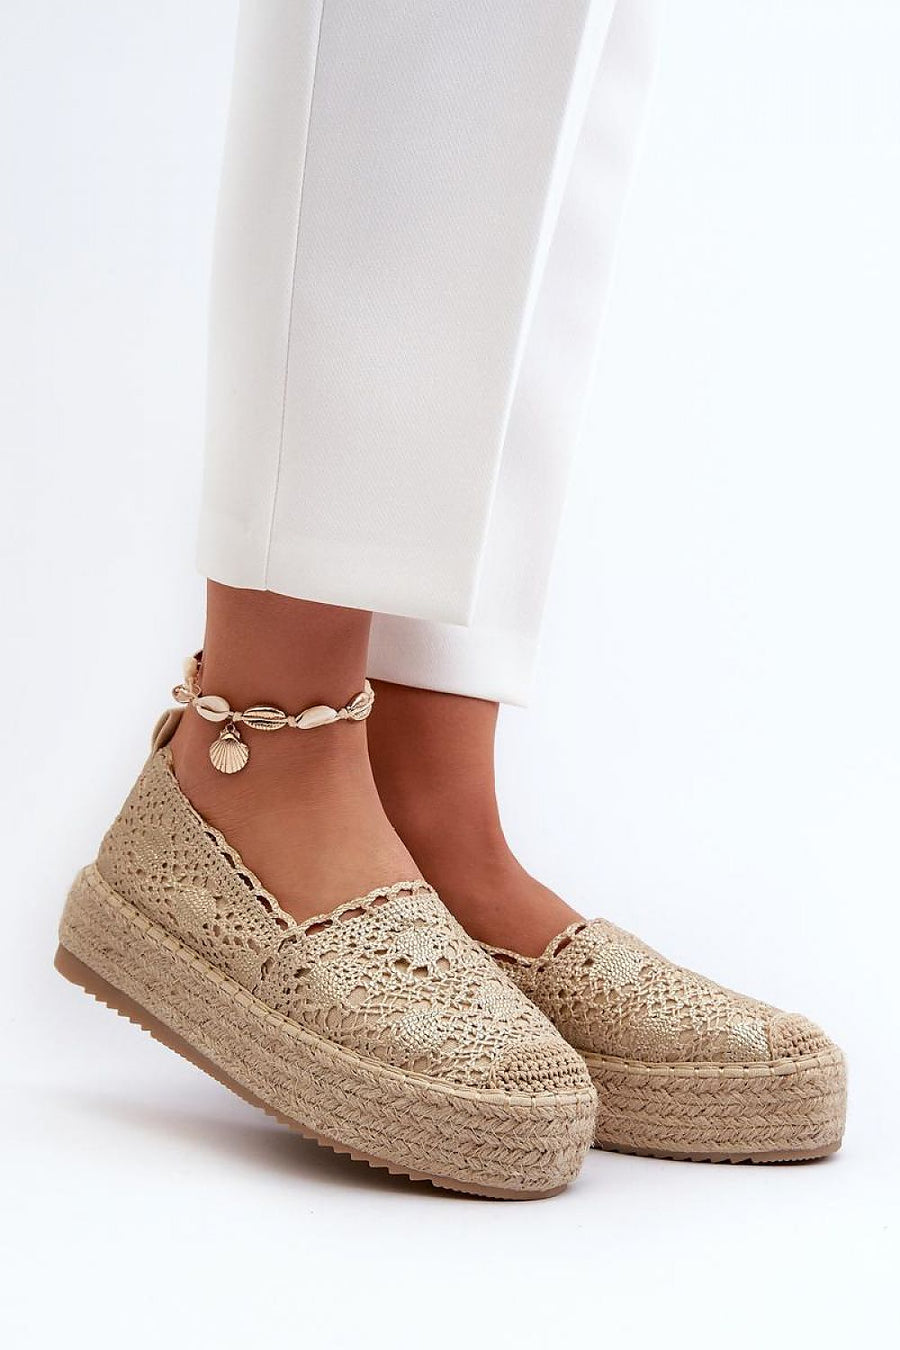 Espadrilles Model 197139 Step in style